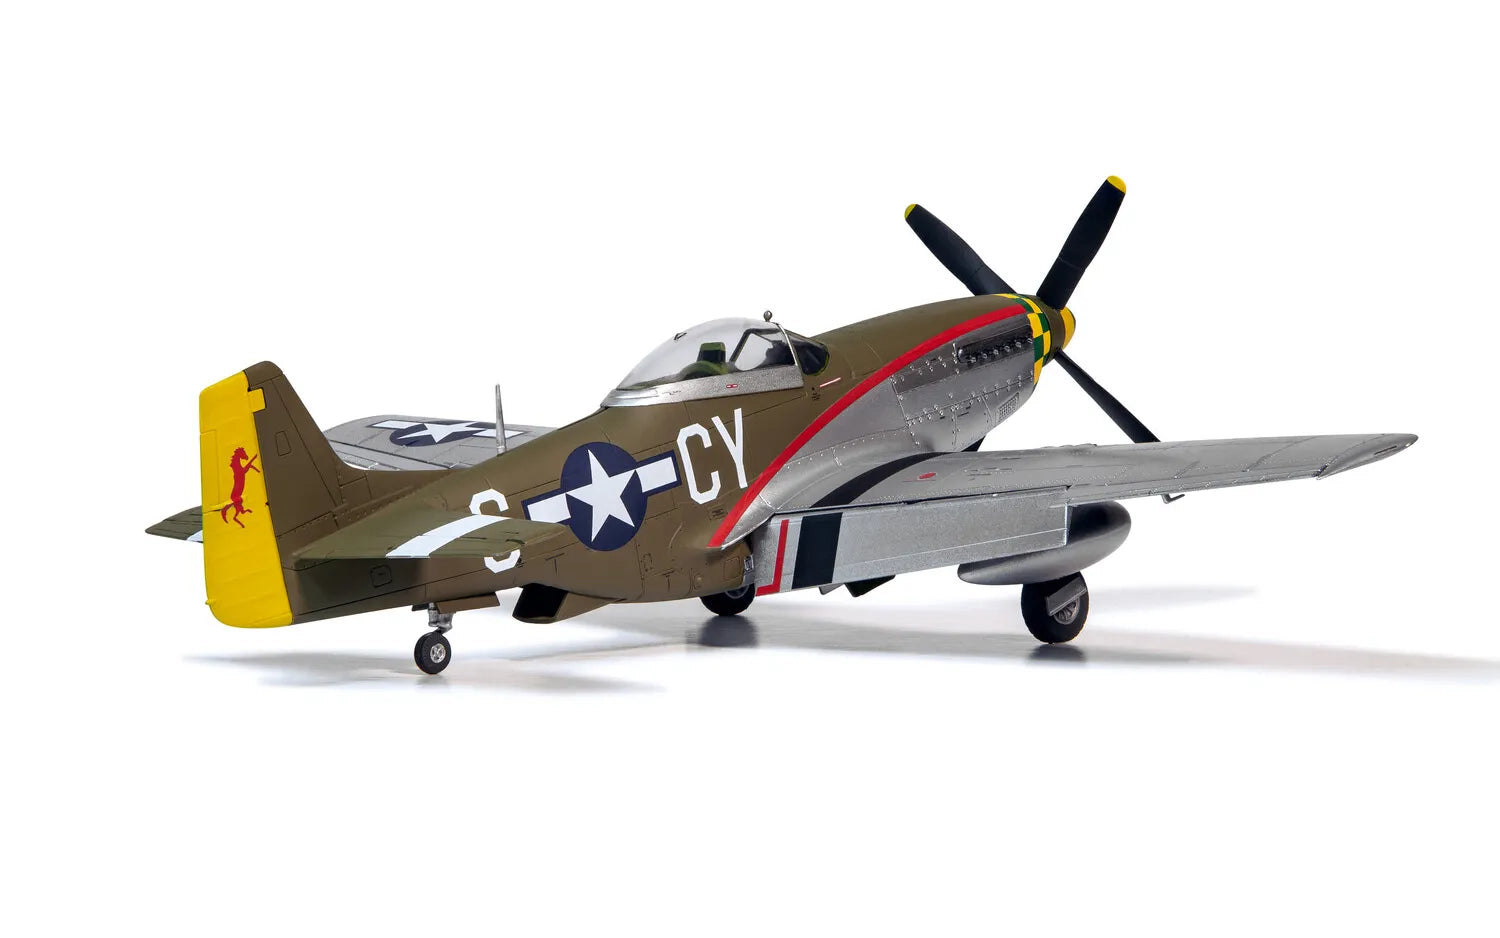 North American P-51D Mustang (1:48) - Loaded Dice Barry Vale of Glamorgan CF64 3HD